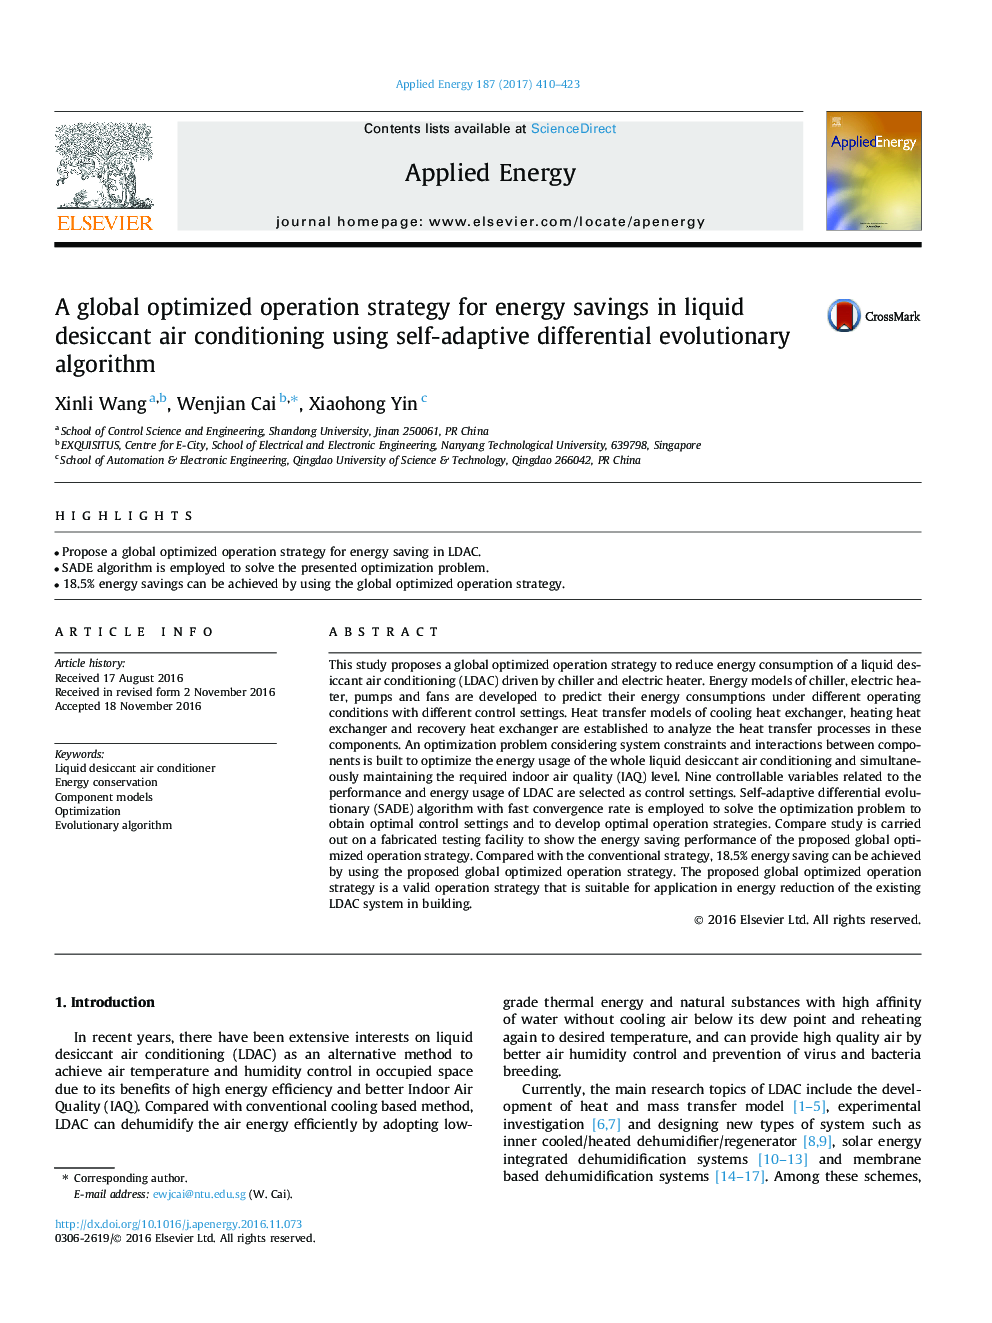 A global optimized operation strategy for energy savings in liquid desiccant air conditioning using self-adaptive differential evolutionary algorithm